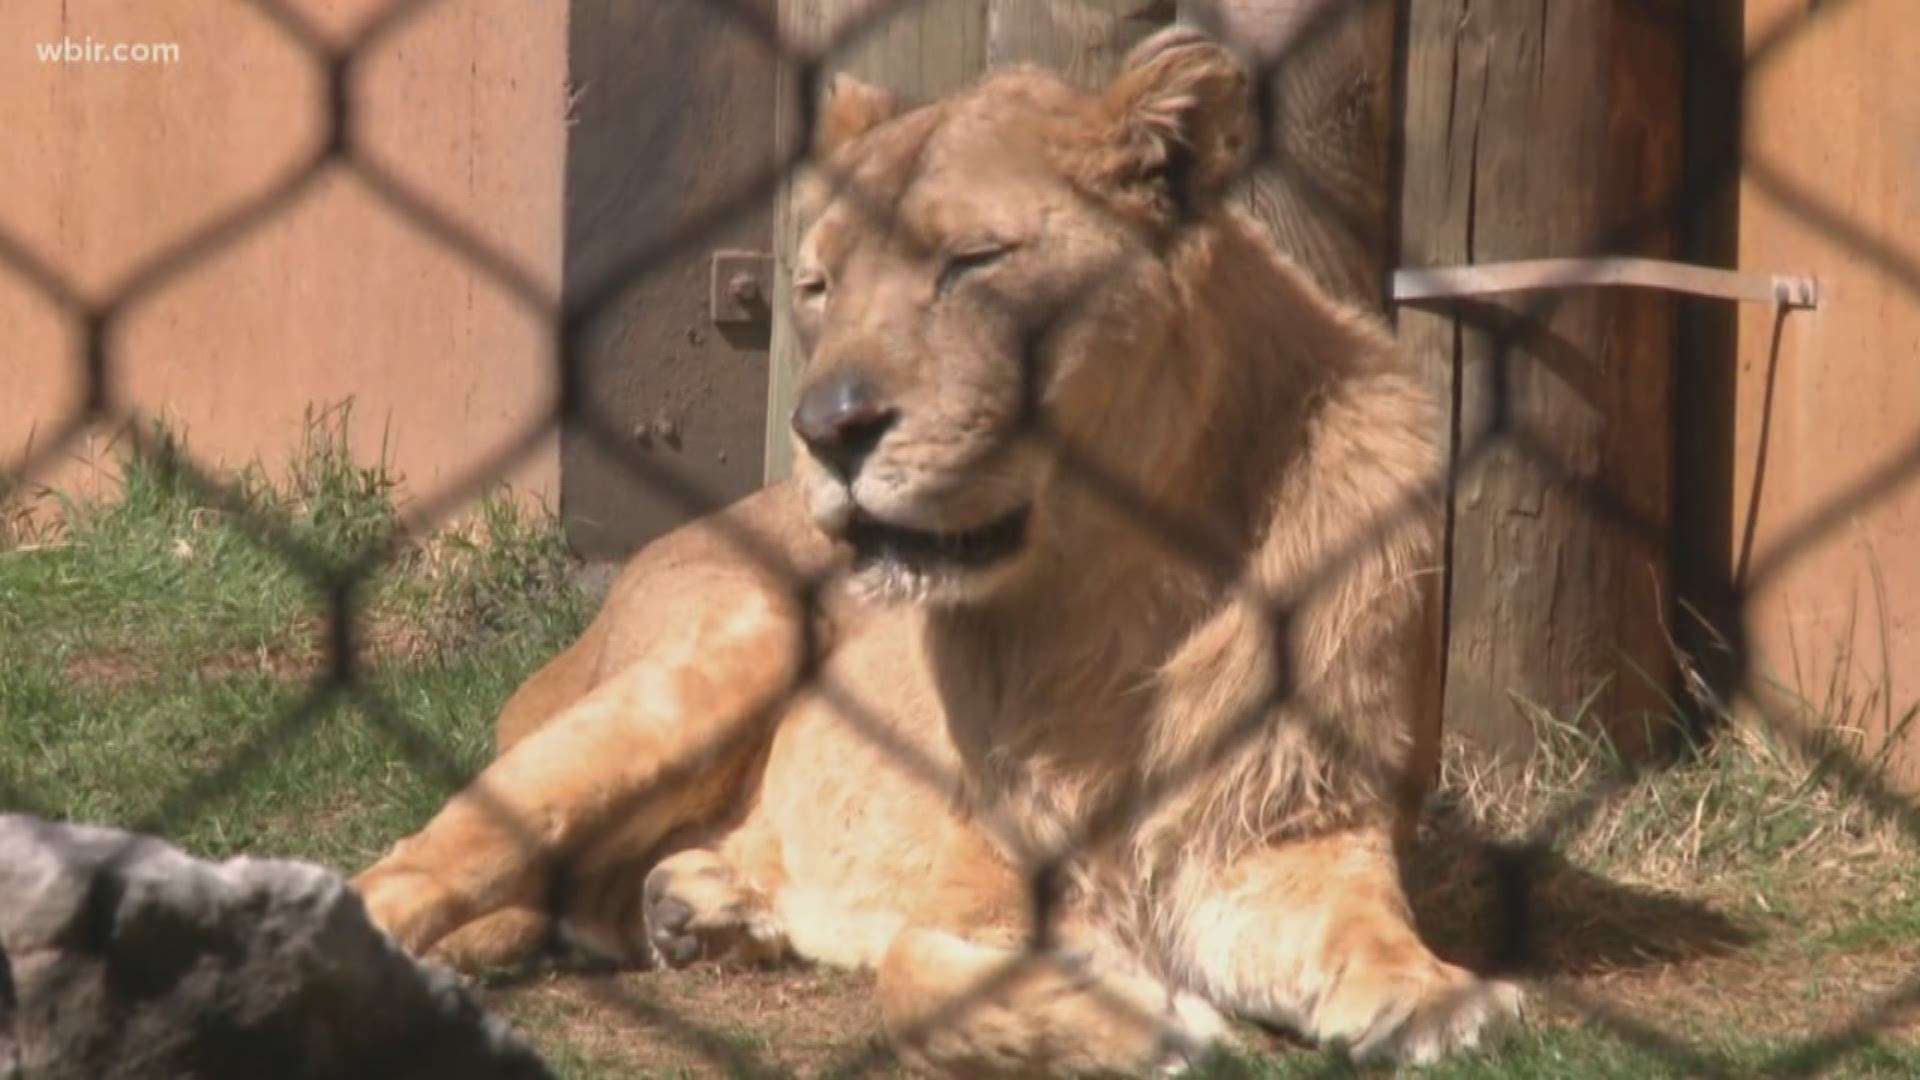 A female lion at Zoo Knoxville has a mane due to hormones. It is not often seen in the wild.